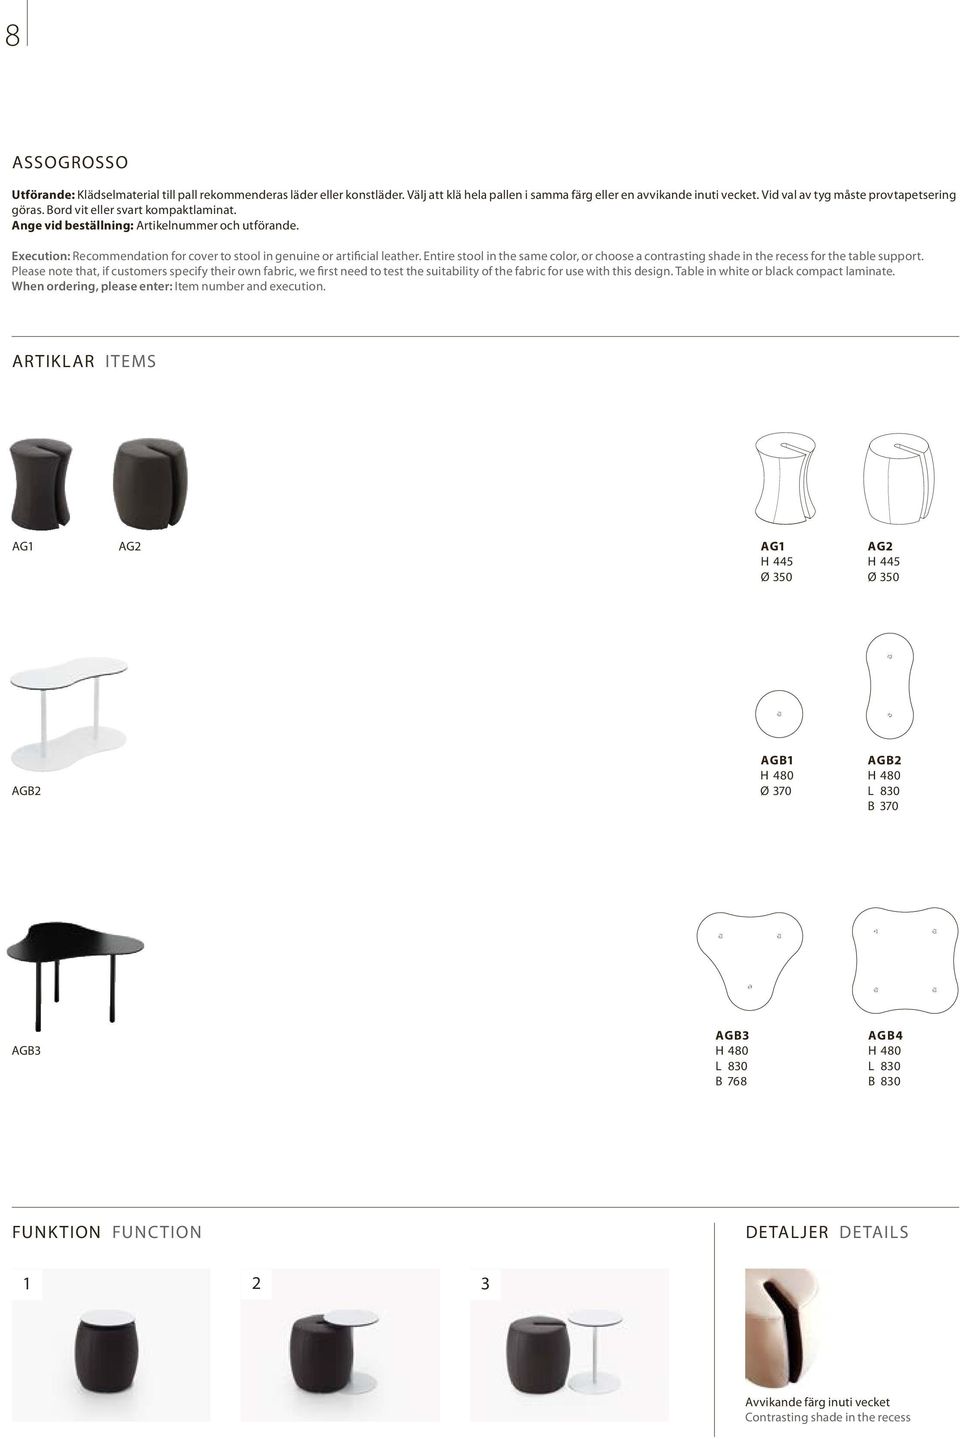 Execution: Recommendation for cover to stool in genuine or artificial leather. Entire stool in the same color, or choose a contrasting shade in the recess for the table support.